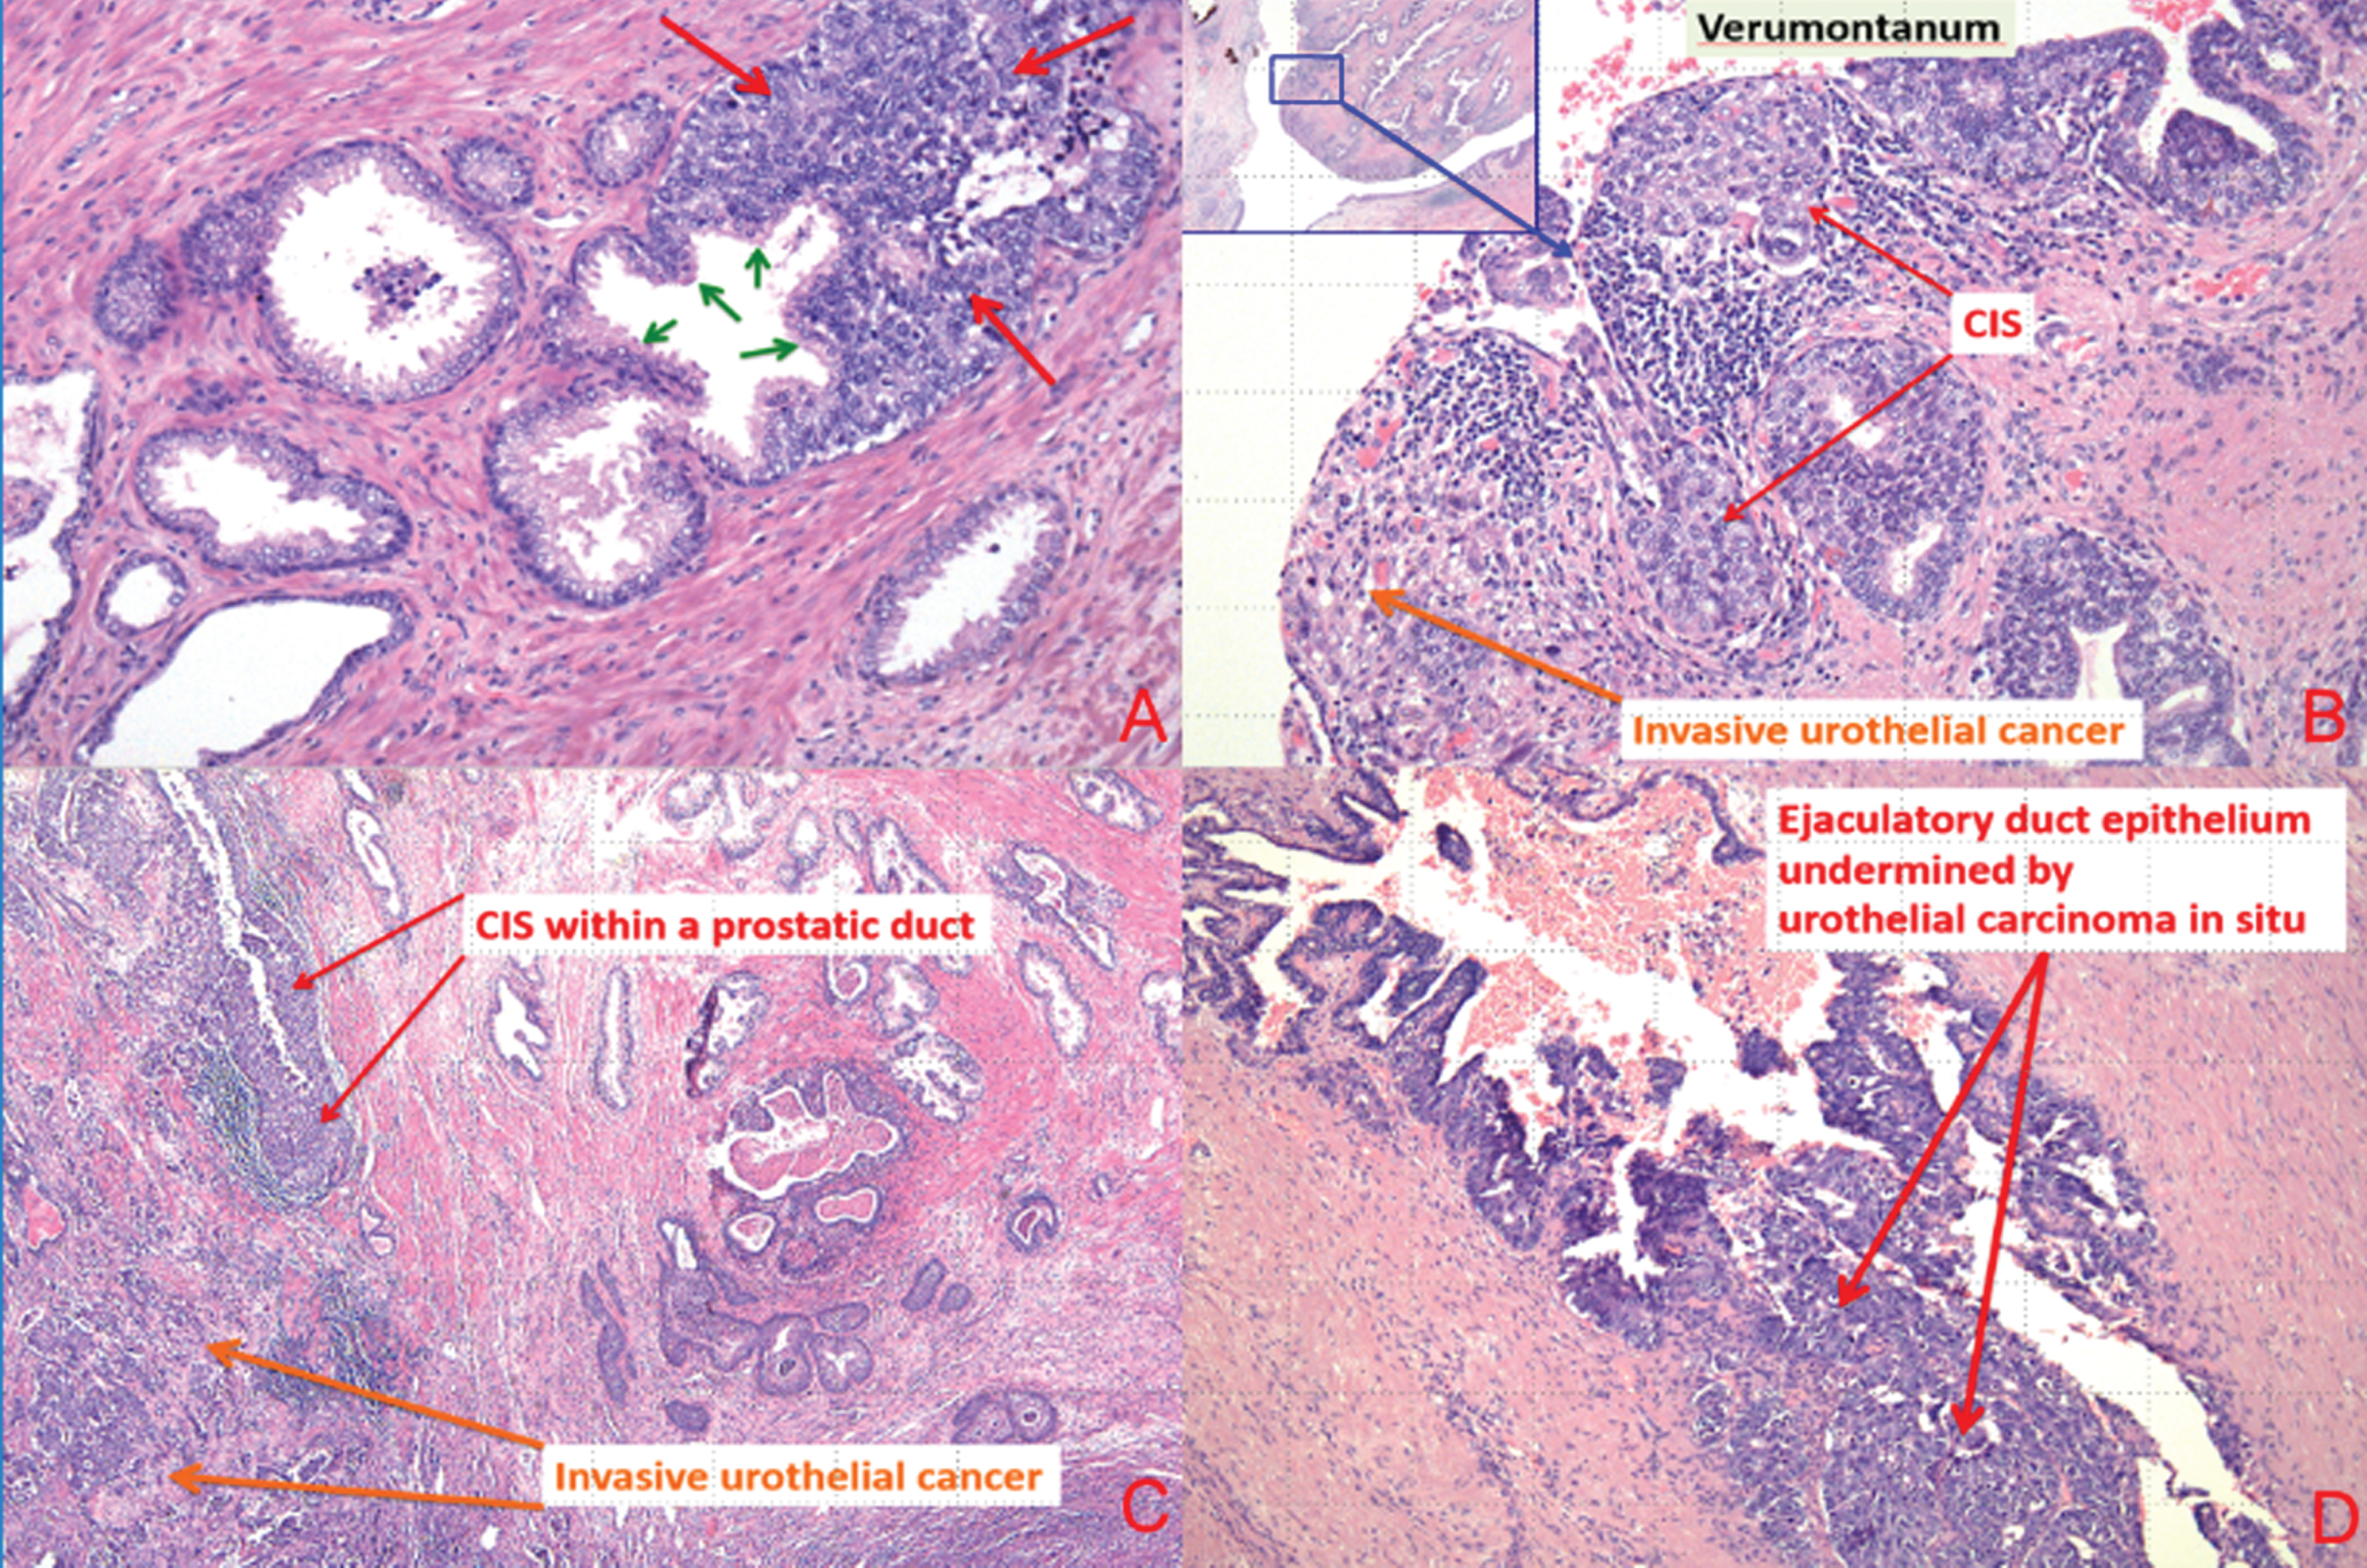 (a) Carcinoma in situ urothelial cells invading prostatic glands (small green arrows represent secretory cell and large red arrows represent urothelial carcinoma in situ). (b) Urothelial carcinoma in situ prostatic urethra and ducts and invasive urothelial carcinoma at the level of verumontanum. (c) Urothelial CIS involving prostatic duct and invasive urothelial carcinoma. (d) Urothelial carcinoma in situ involving ejaculatory duct.